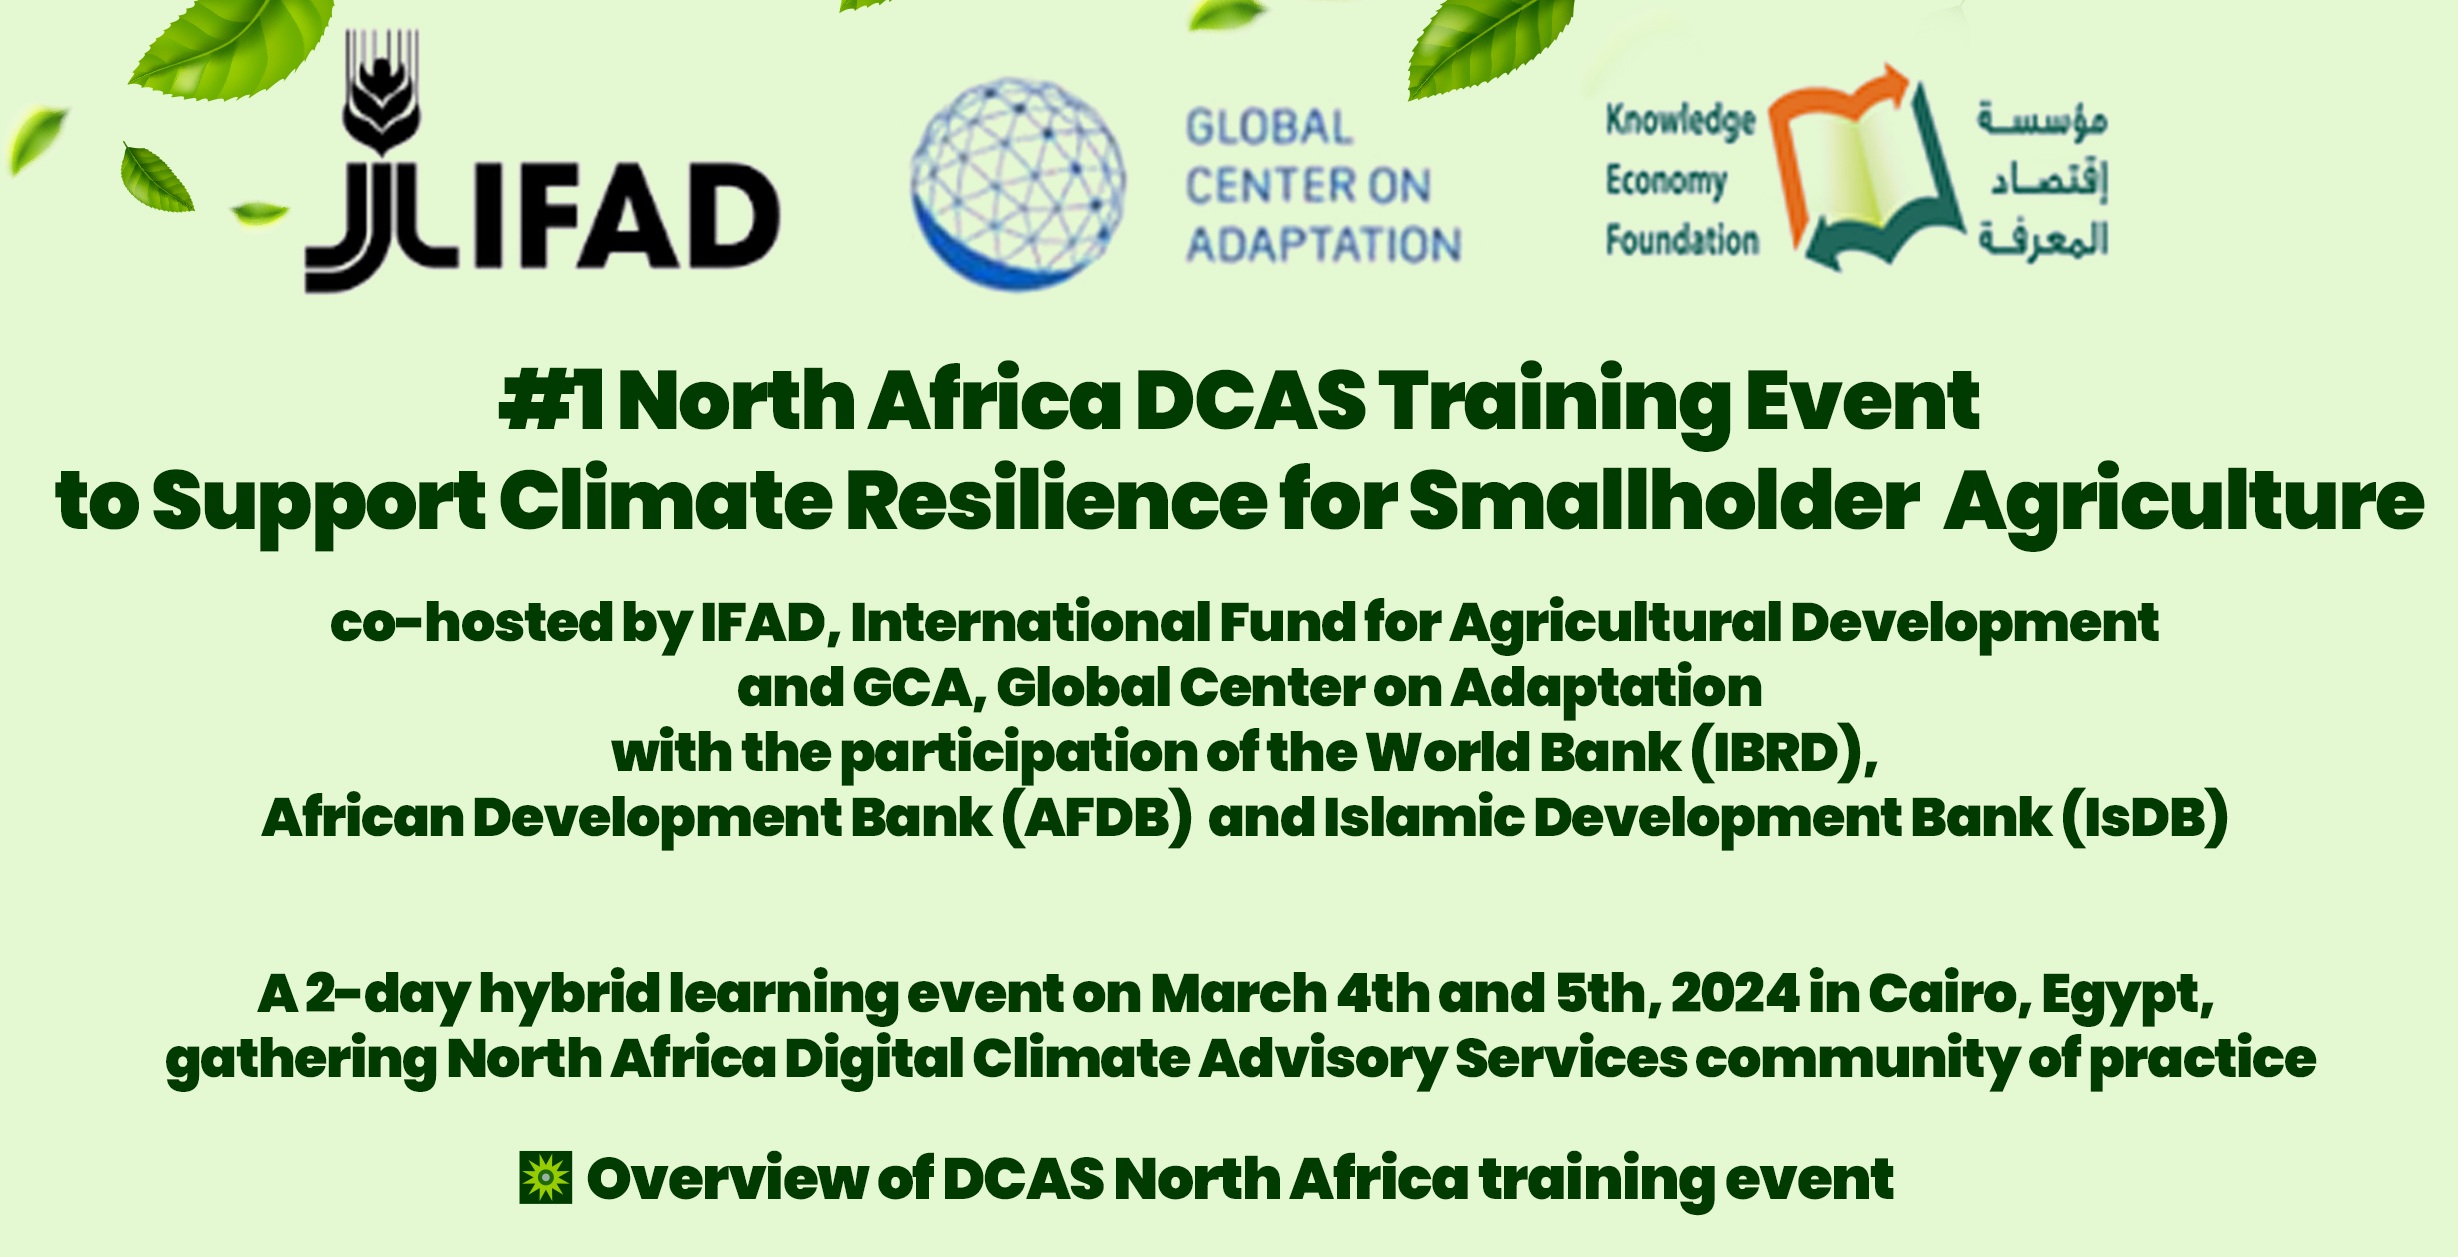 #1 North Africa DCAS Training Event to Support Climate Resilience for Smallholder Agriculture